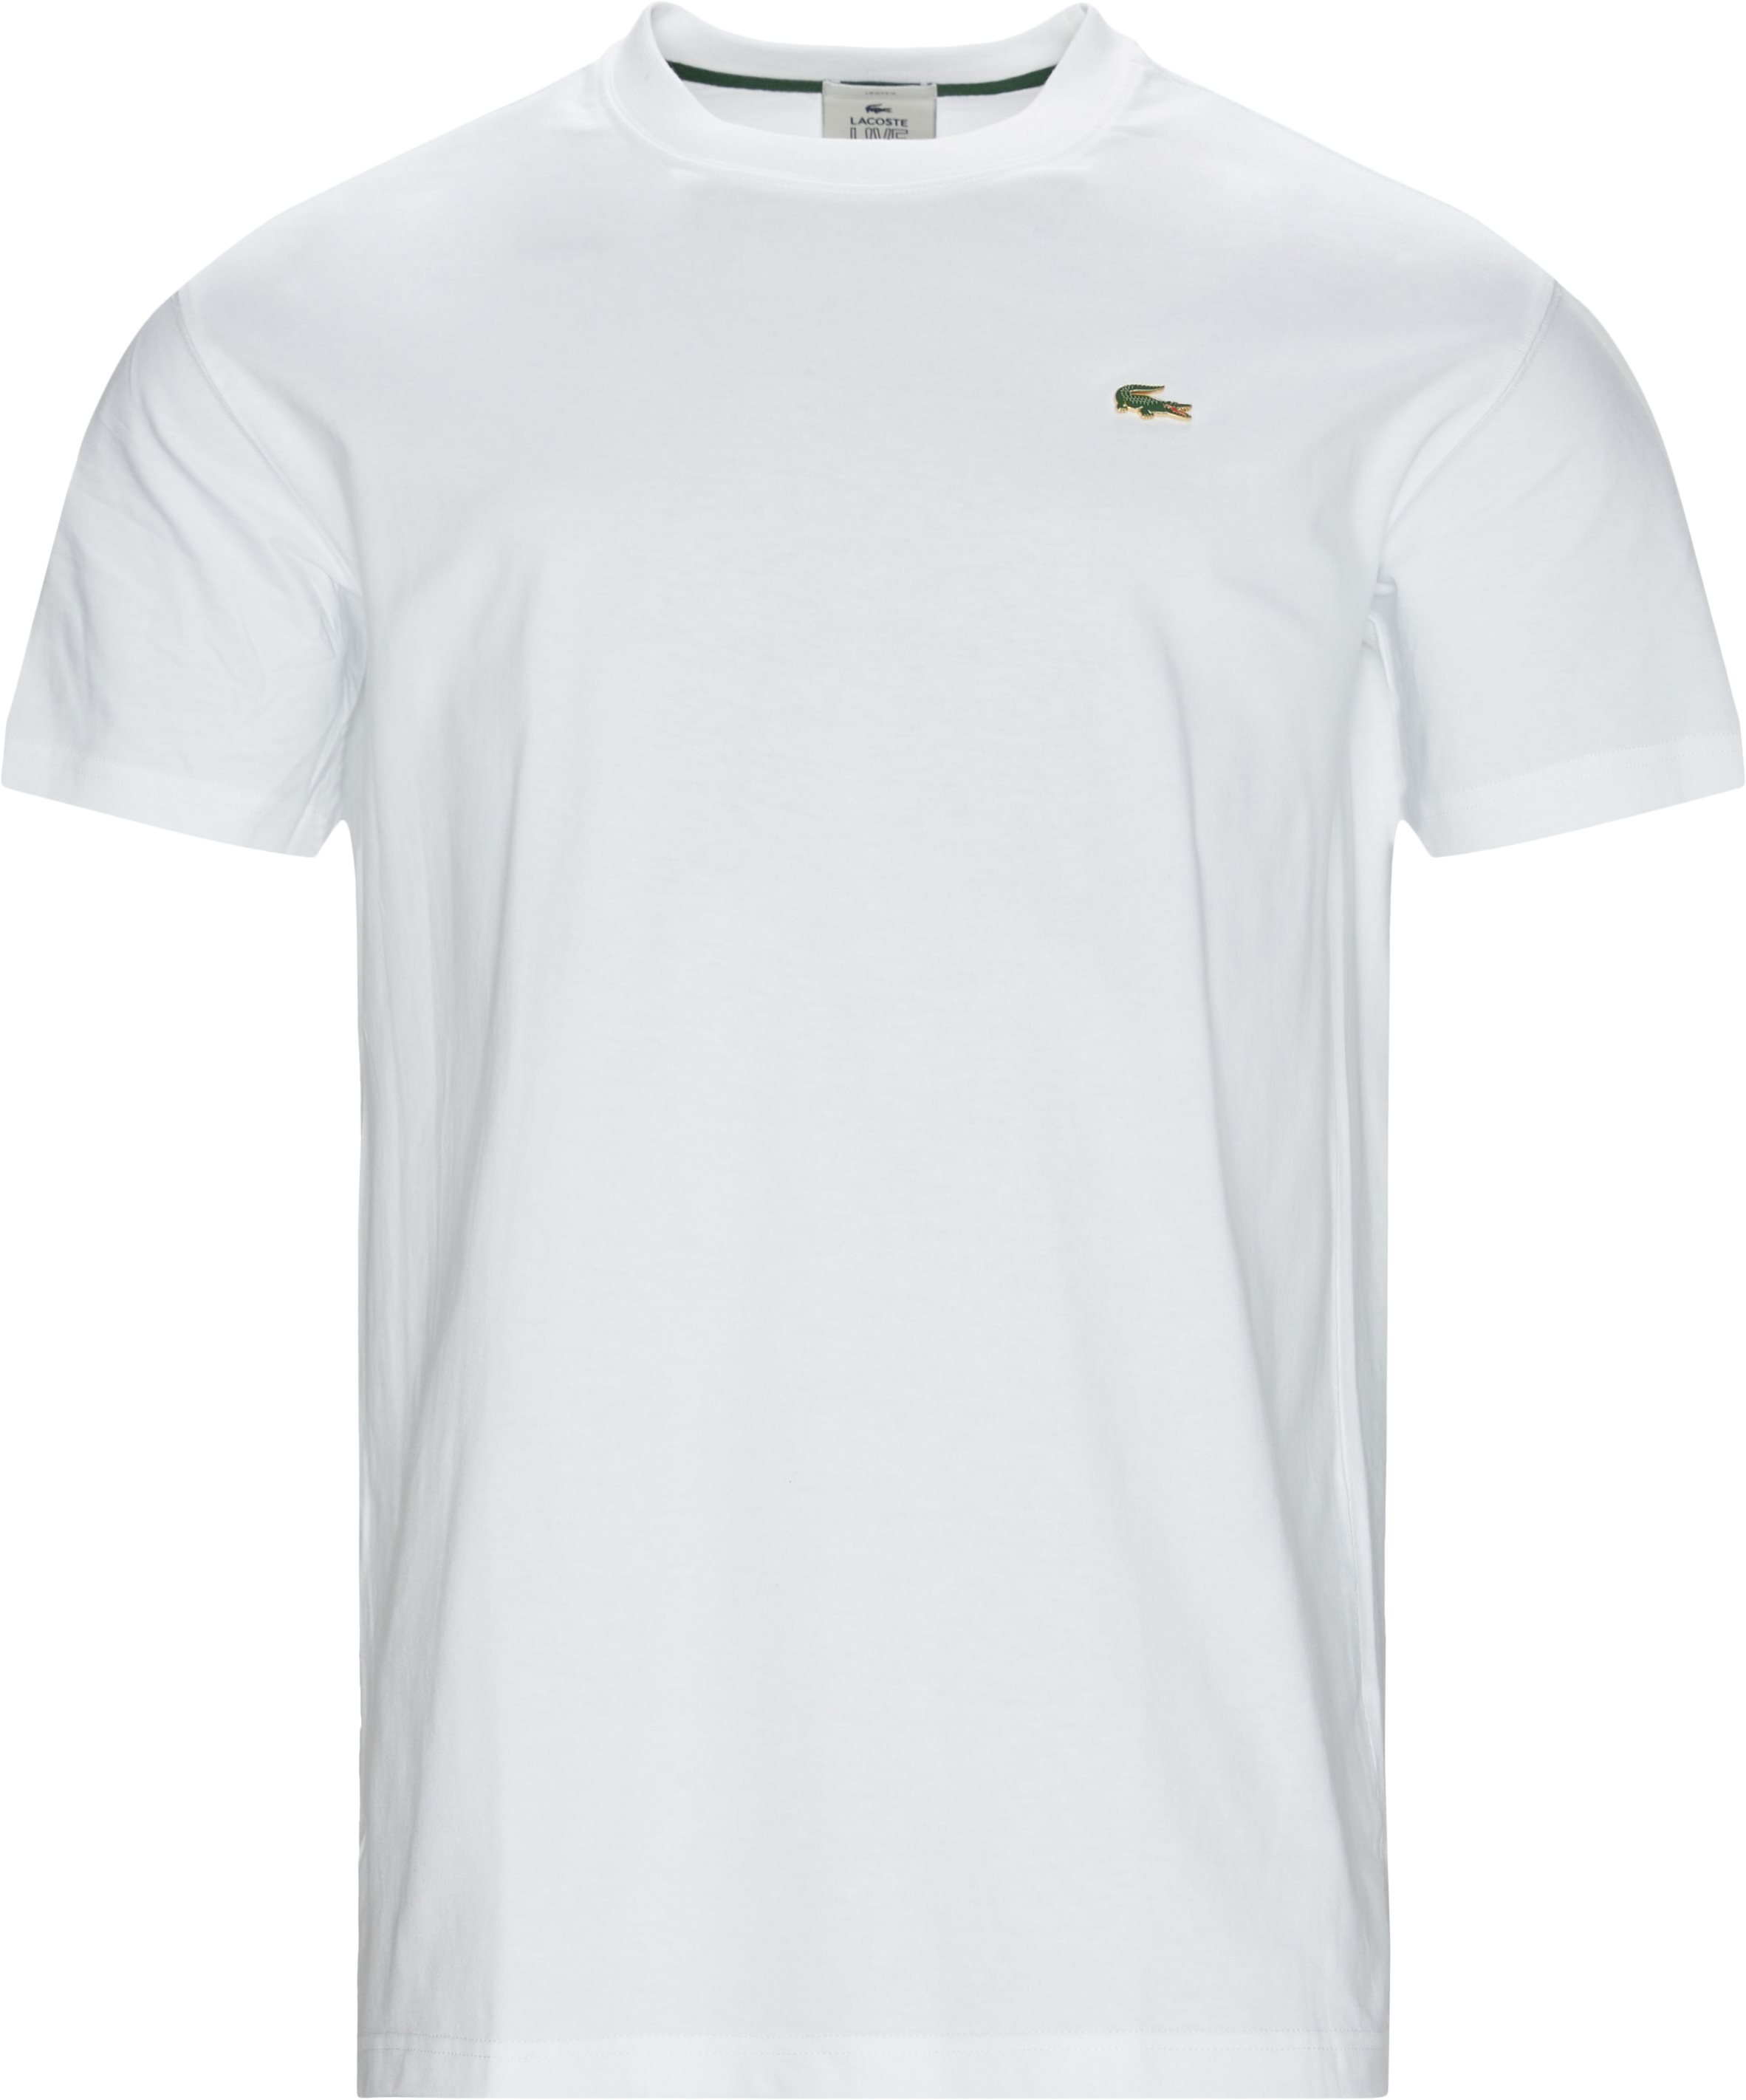 Th9162 Tee - T-shirts - Regular fit - White